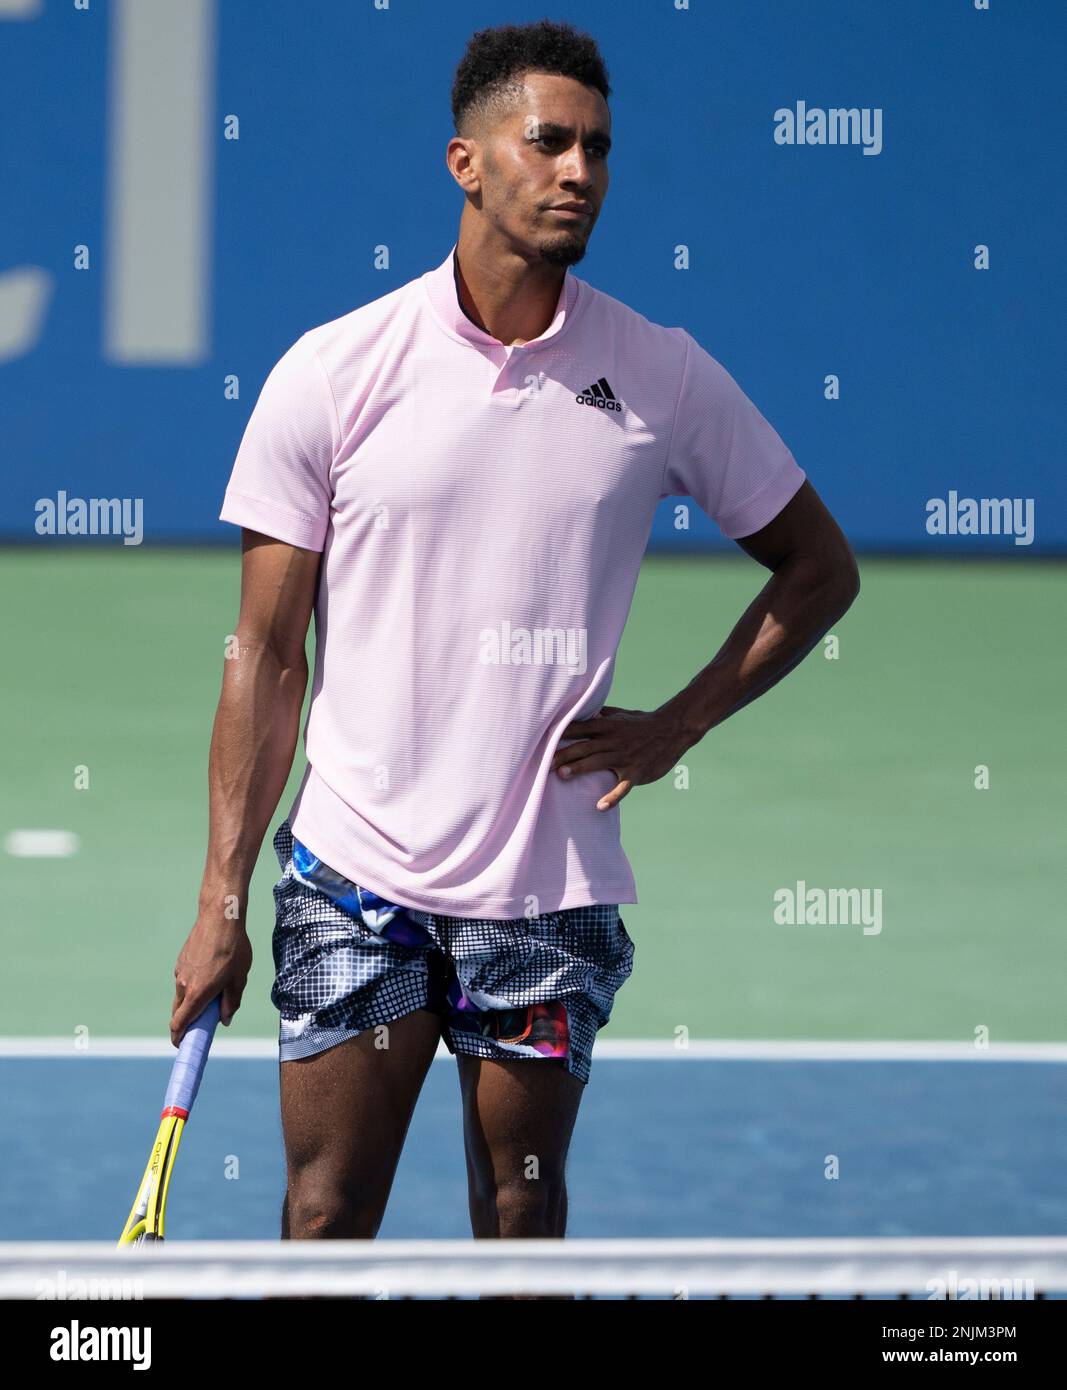 August 1, 2022 Michael Mmoh (USA) loses to Denis Kudla (USA), 1-6, 6-3, 6-4 at the CitiOpen being played at Rock Creek Park Tennis Center in Washington, DC, , USA ©Leslie Billman/Tennisclix/CalSportMedia (